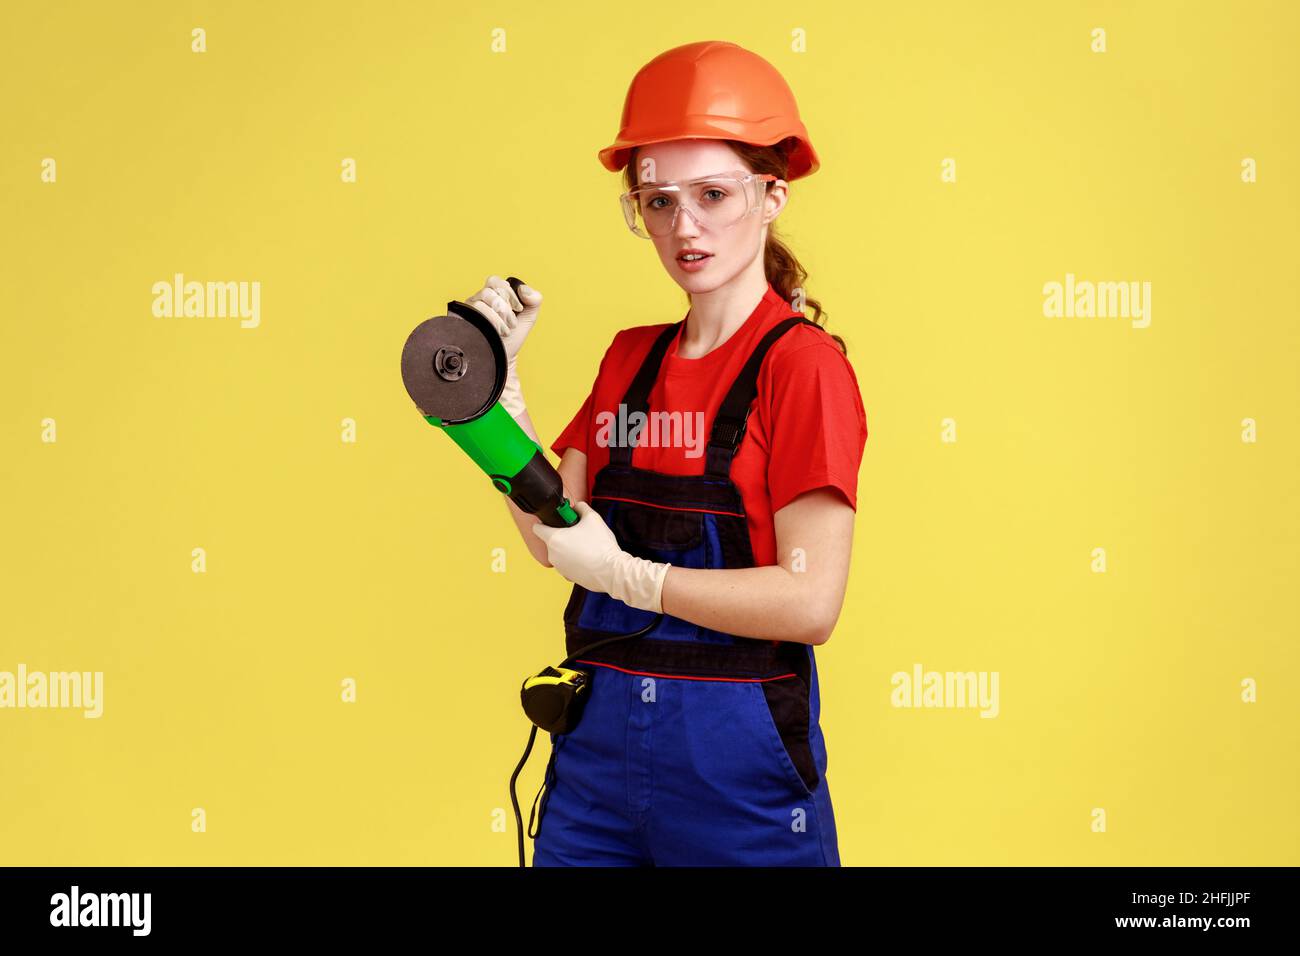 Portrait of serious carpenter woman working with angle grinder, having confident facial expressing, wearing overalls and protective helmet. Indoor studio shot isolated on yellow background. Stock Photo